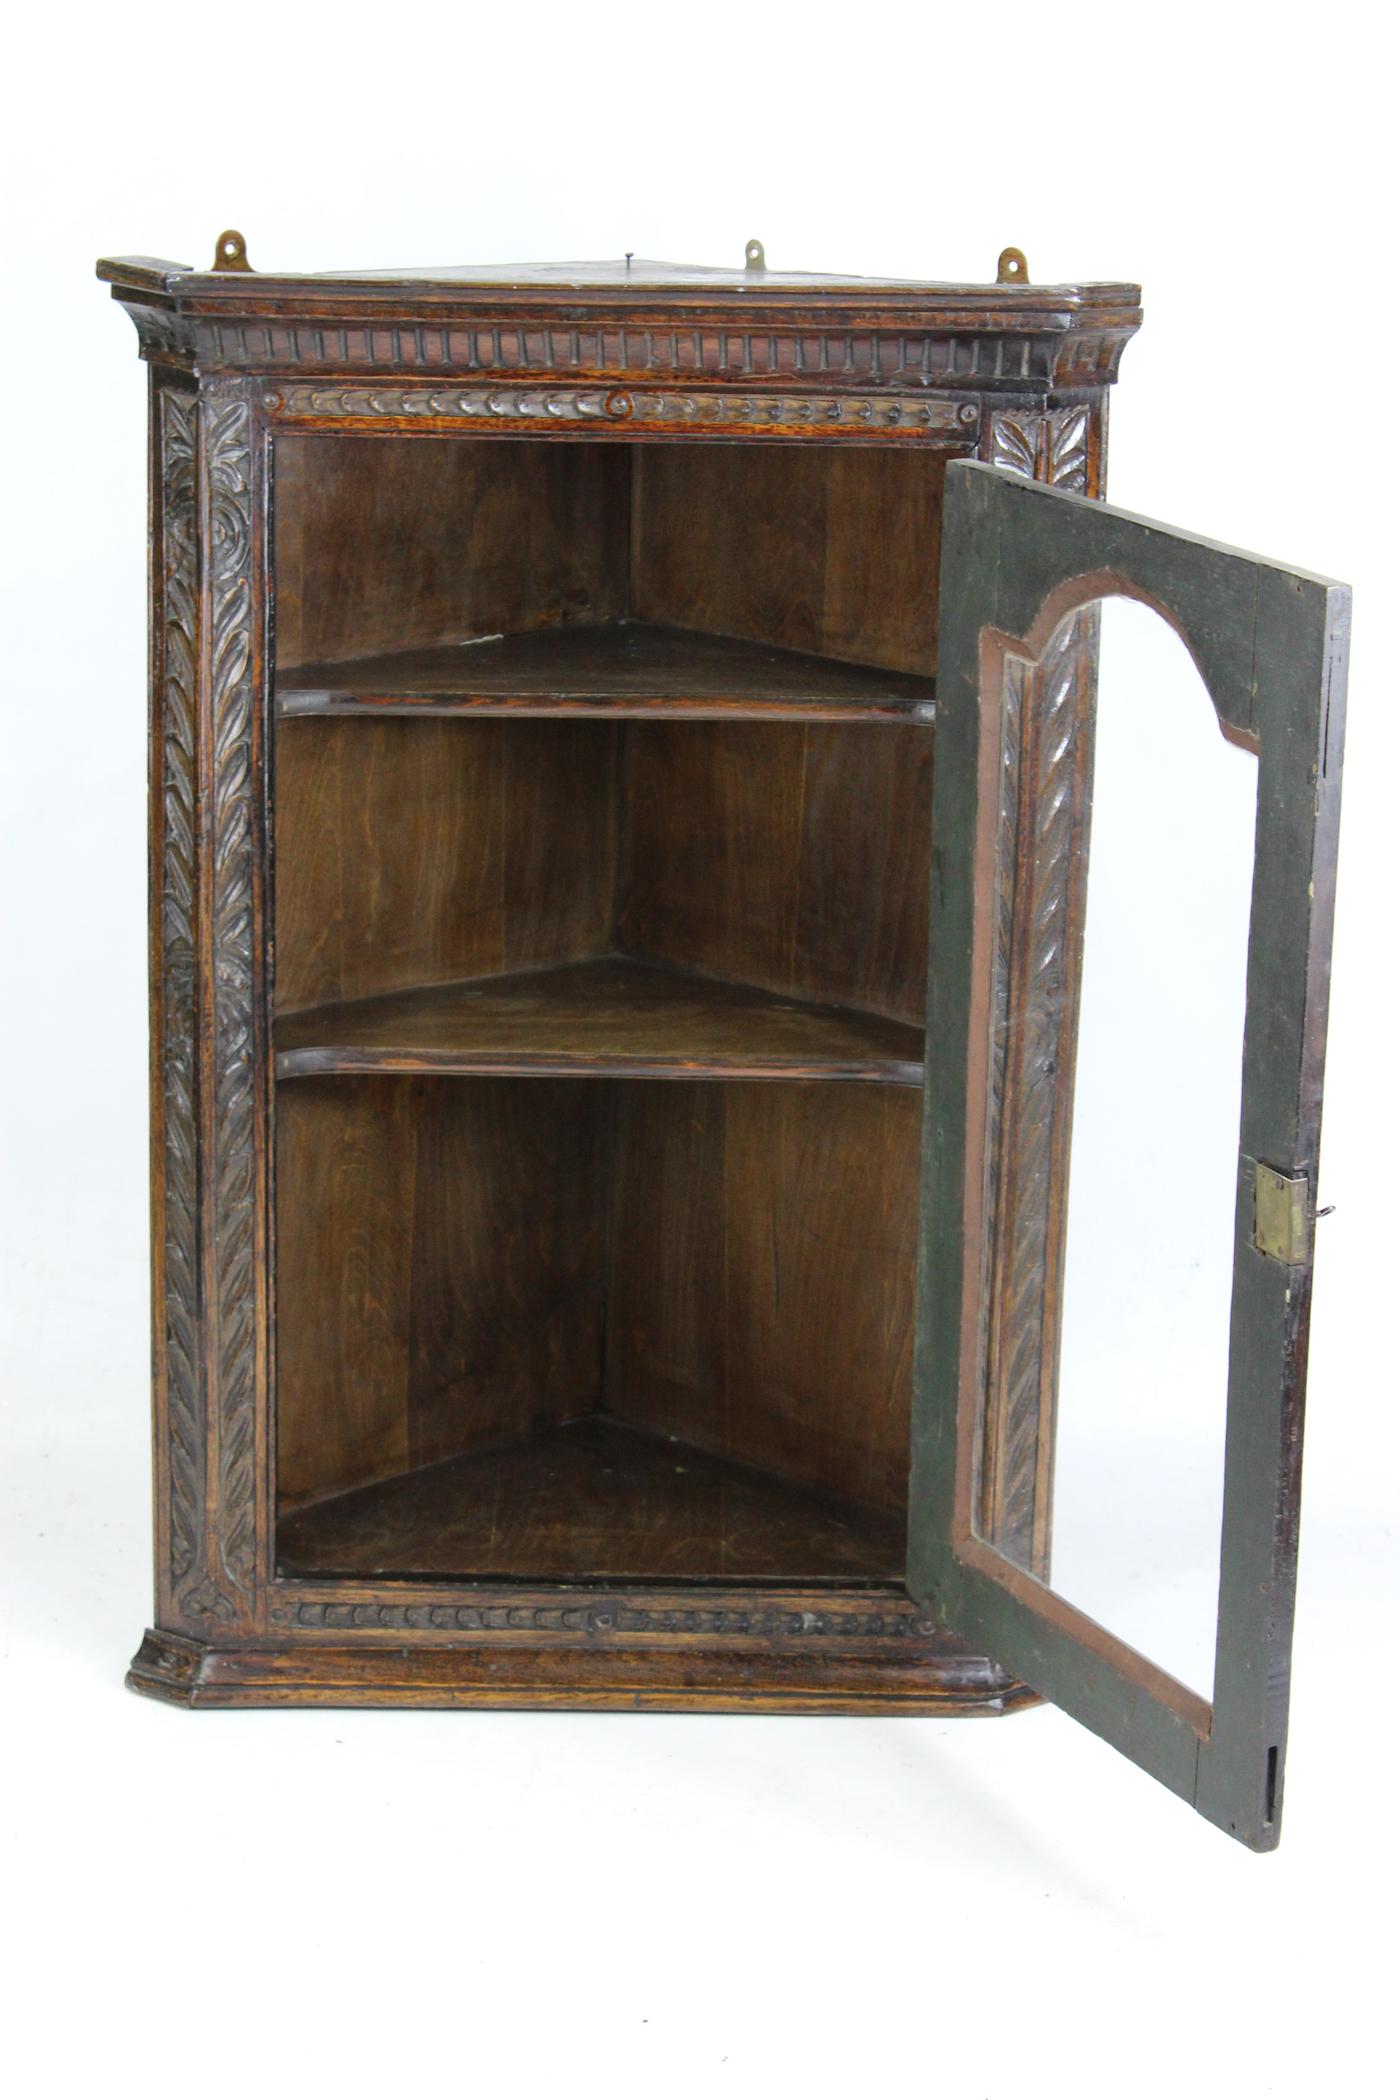 An attractive small antique Georgian hanging corner cupboard in extensively carved oak with a single glazed panel door. It has a working lock and key (replacement) and 2 shelves to the interior. It has a fancy brass escutcheon and brass H-hinges to